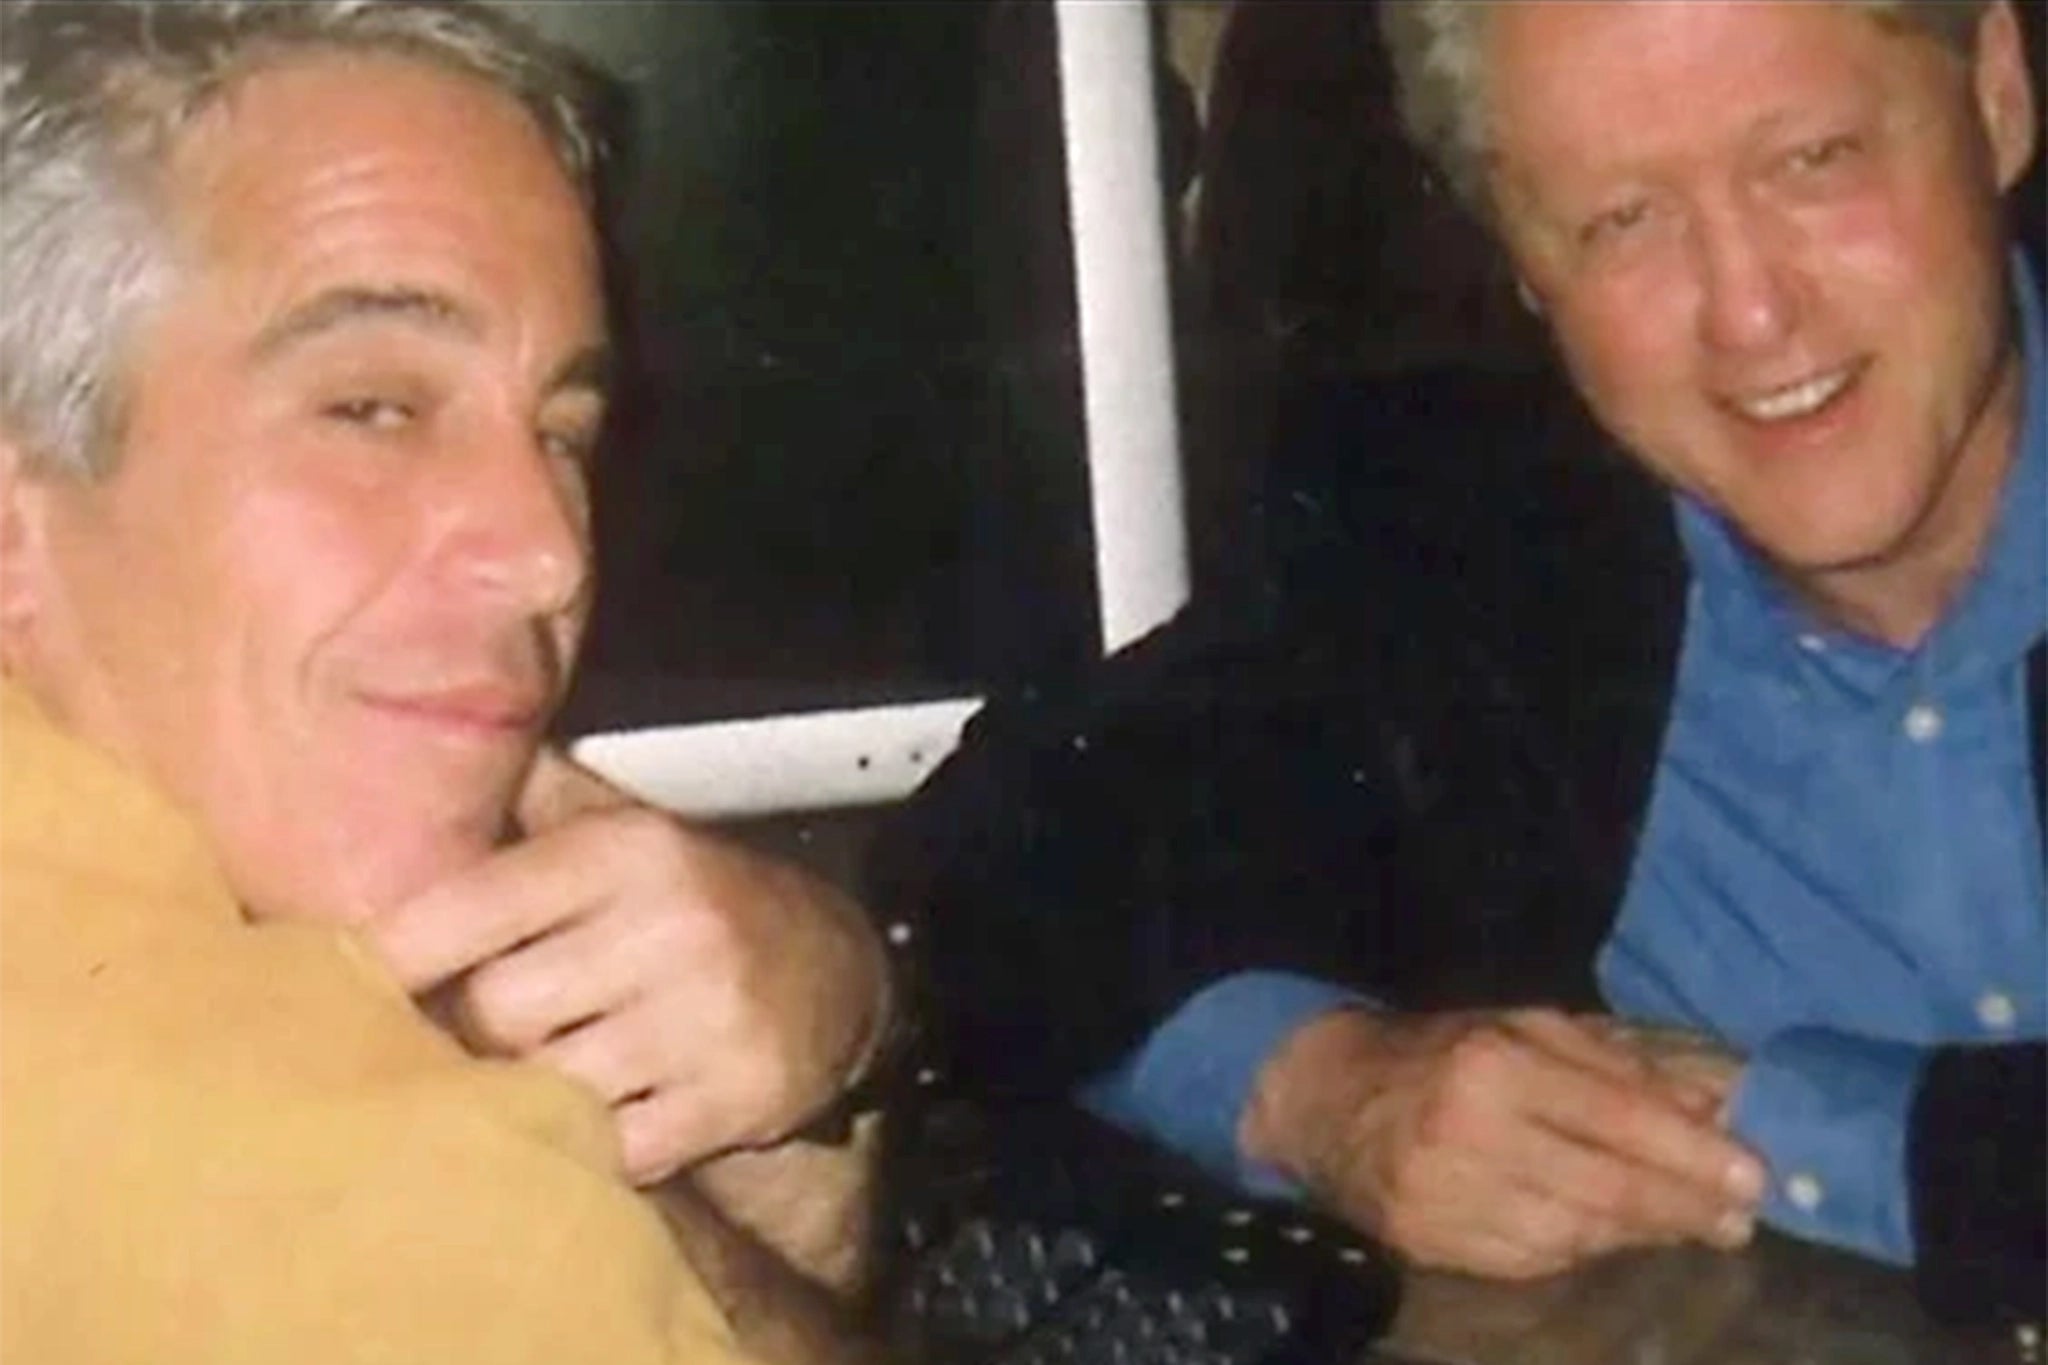 With his wealth, Epstein was able to associate himself with the likes of former US president Bill Clinton